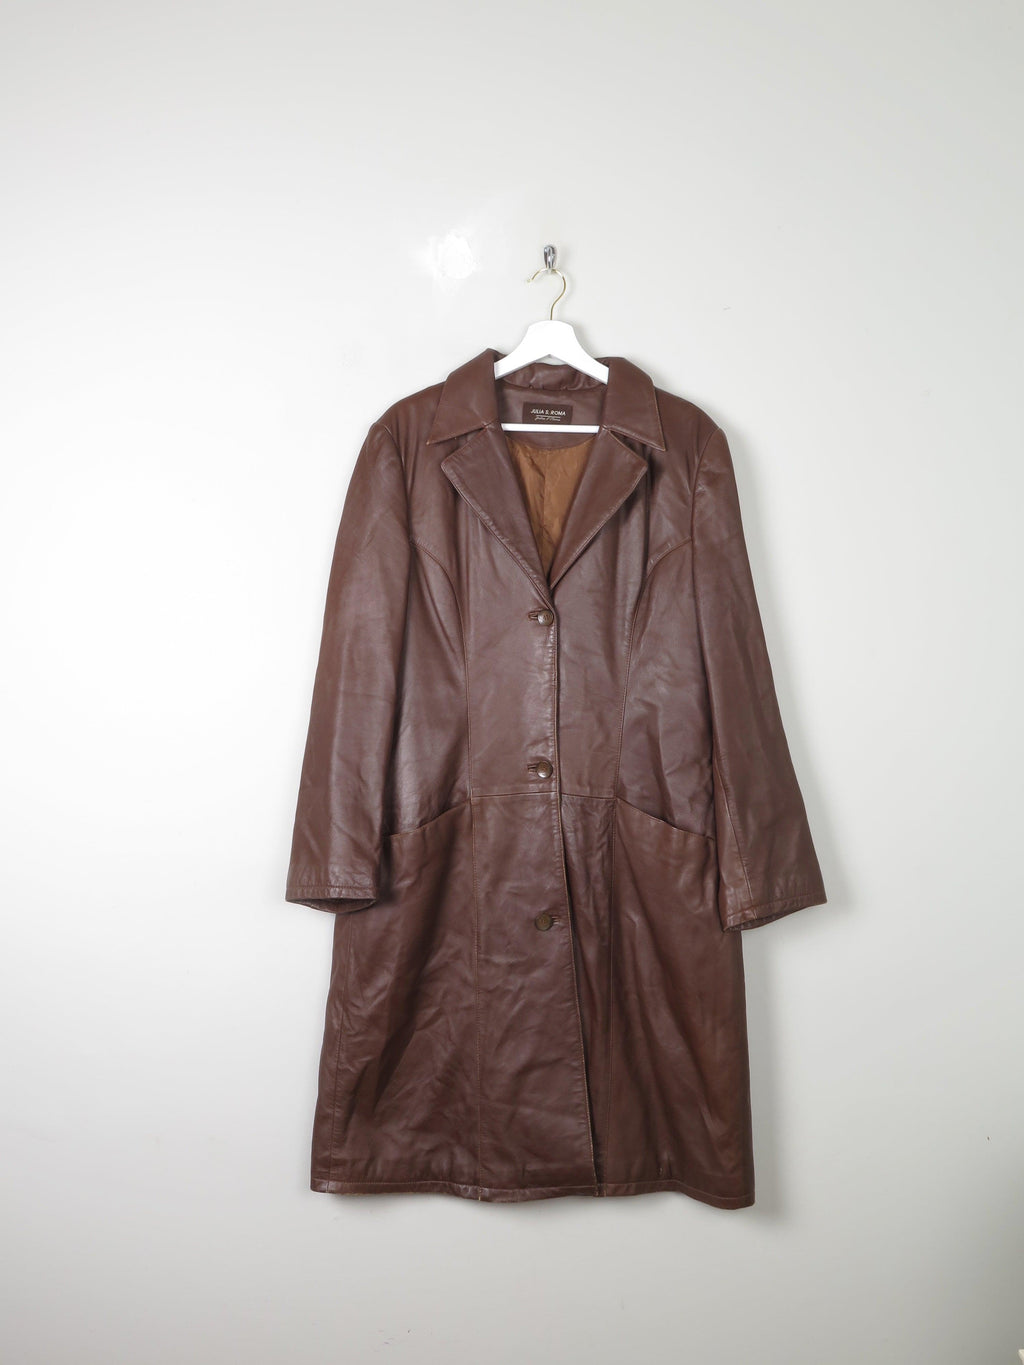 Women's Tan/Brown Soft Leather Coat L - The Harlequin